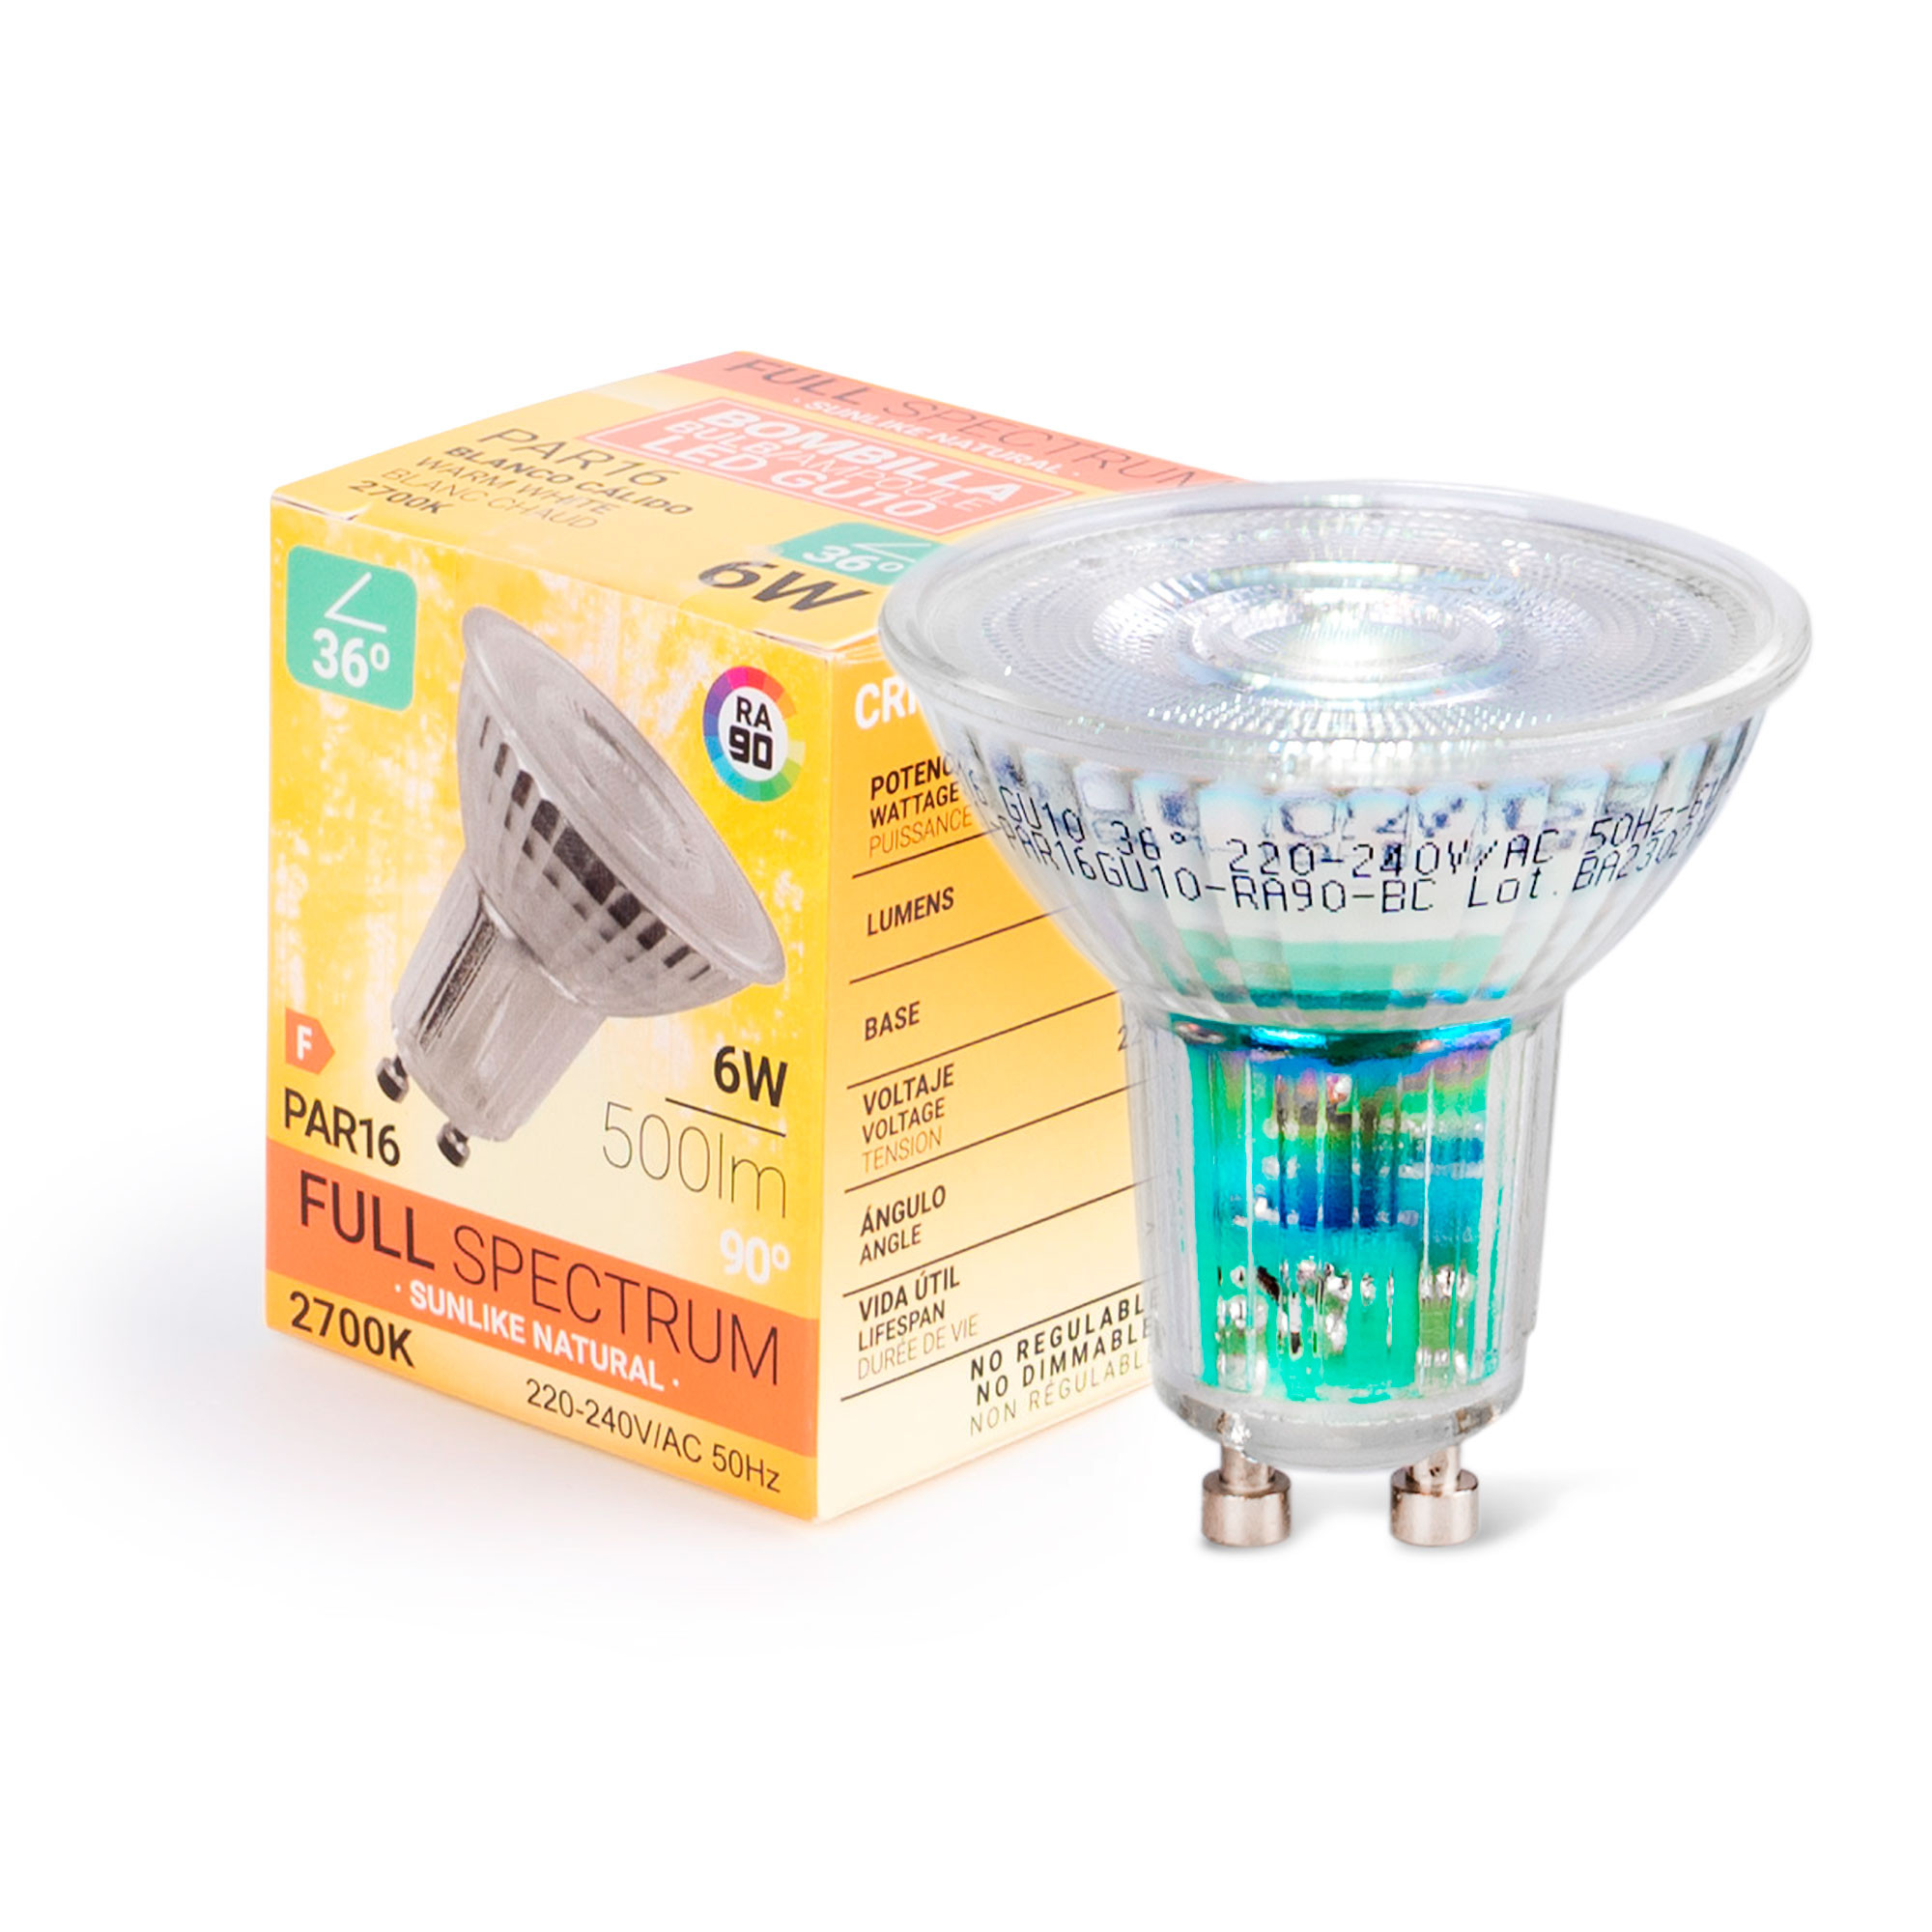 E27 dimmable LED lamp 6W 500 lm 2700K